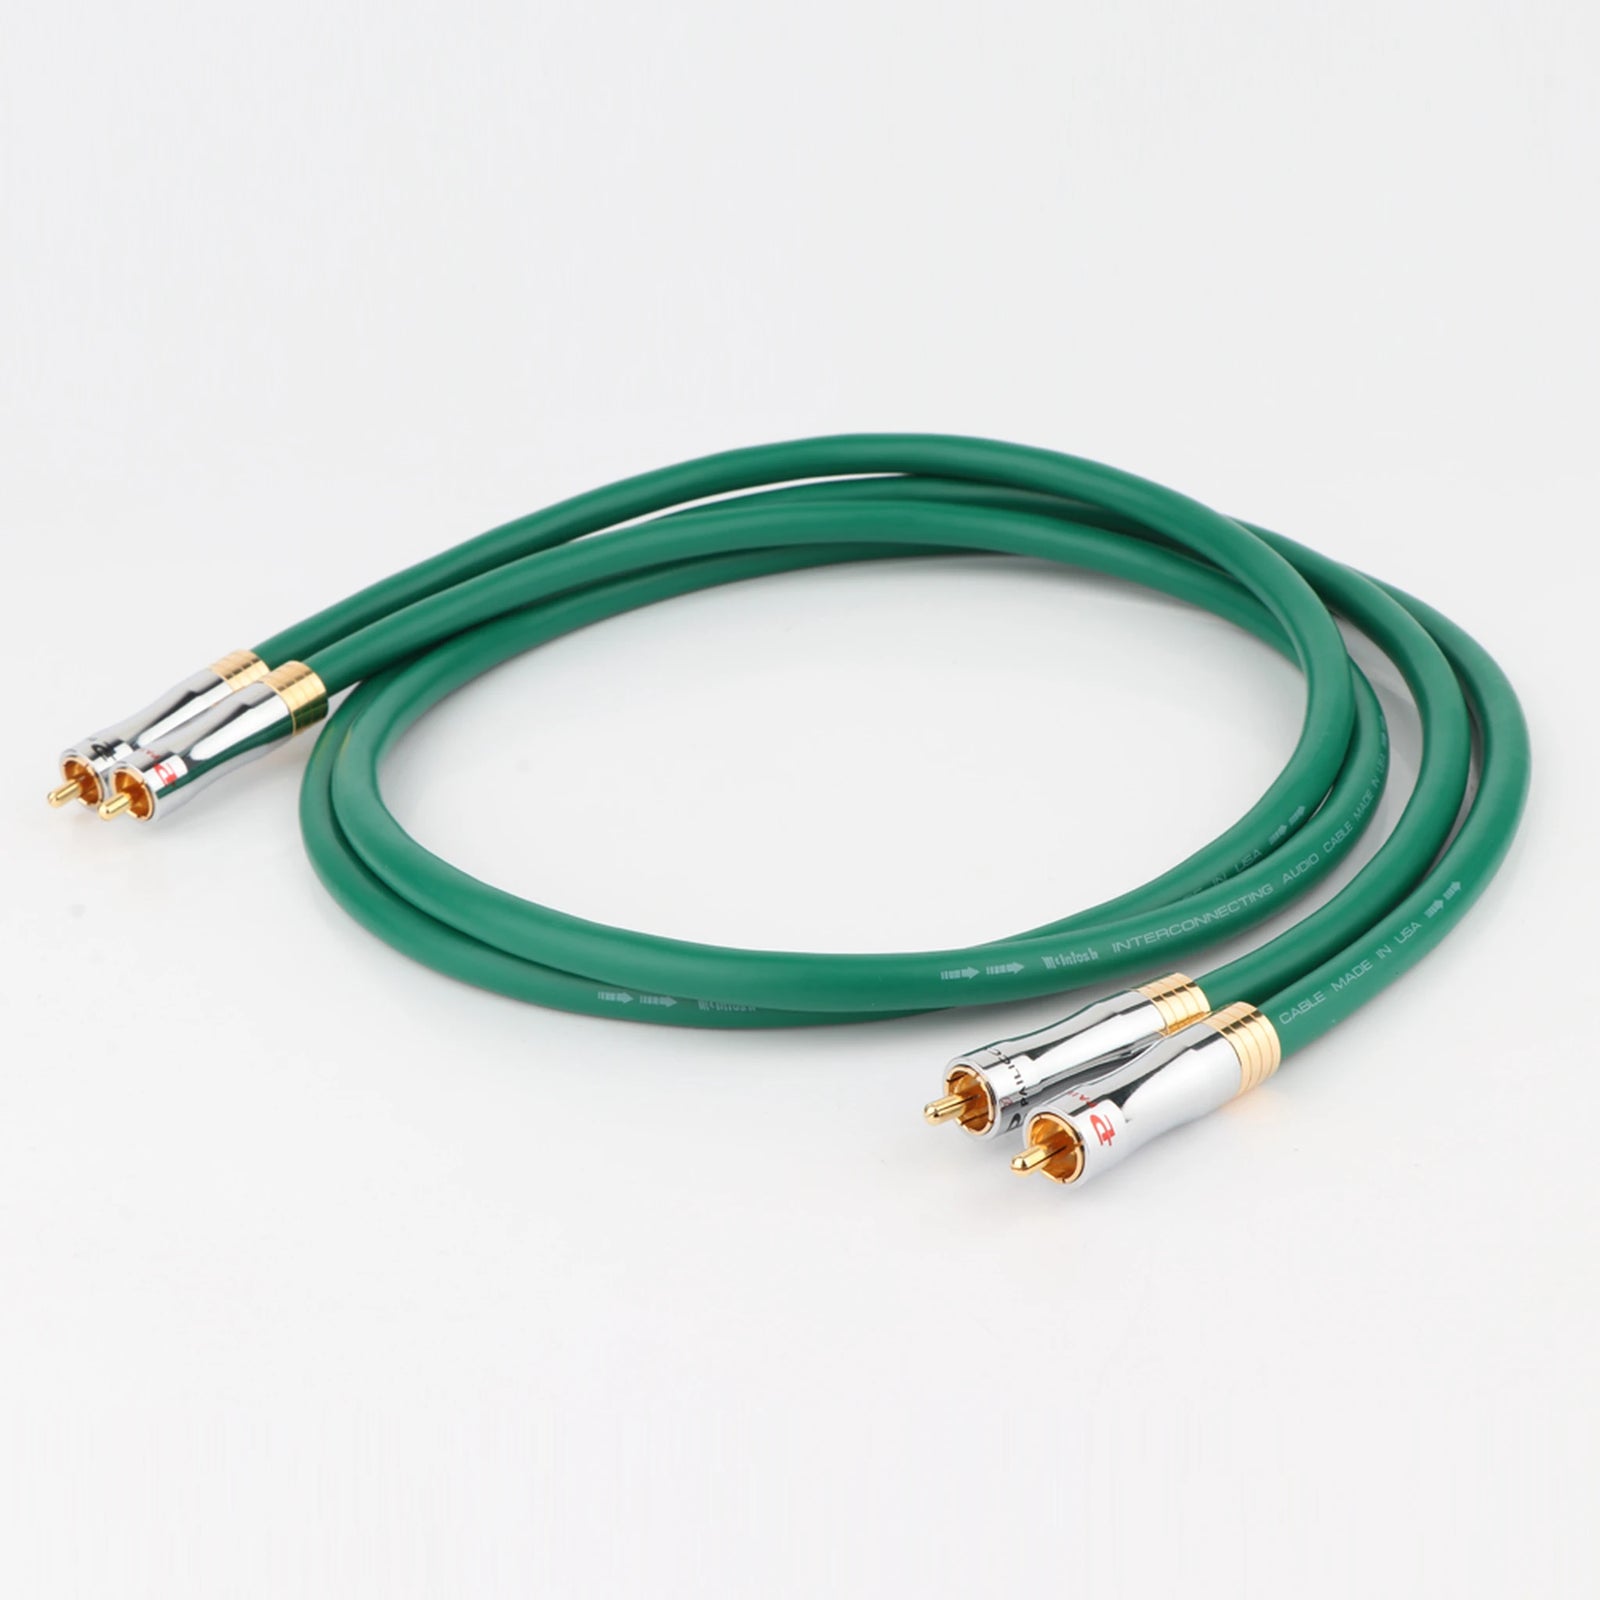 Sub San Audiopure Copper Rca Male To Male Subwoofer Cable - Braided  Shielding